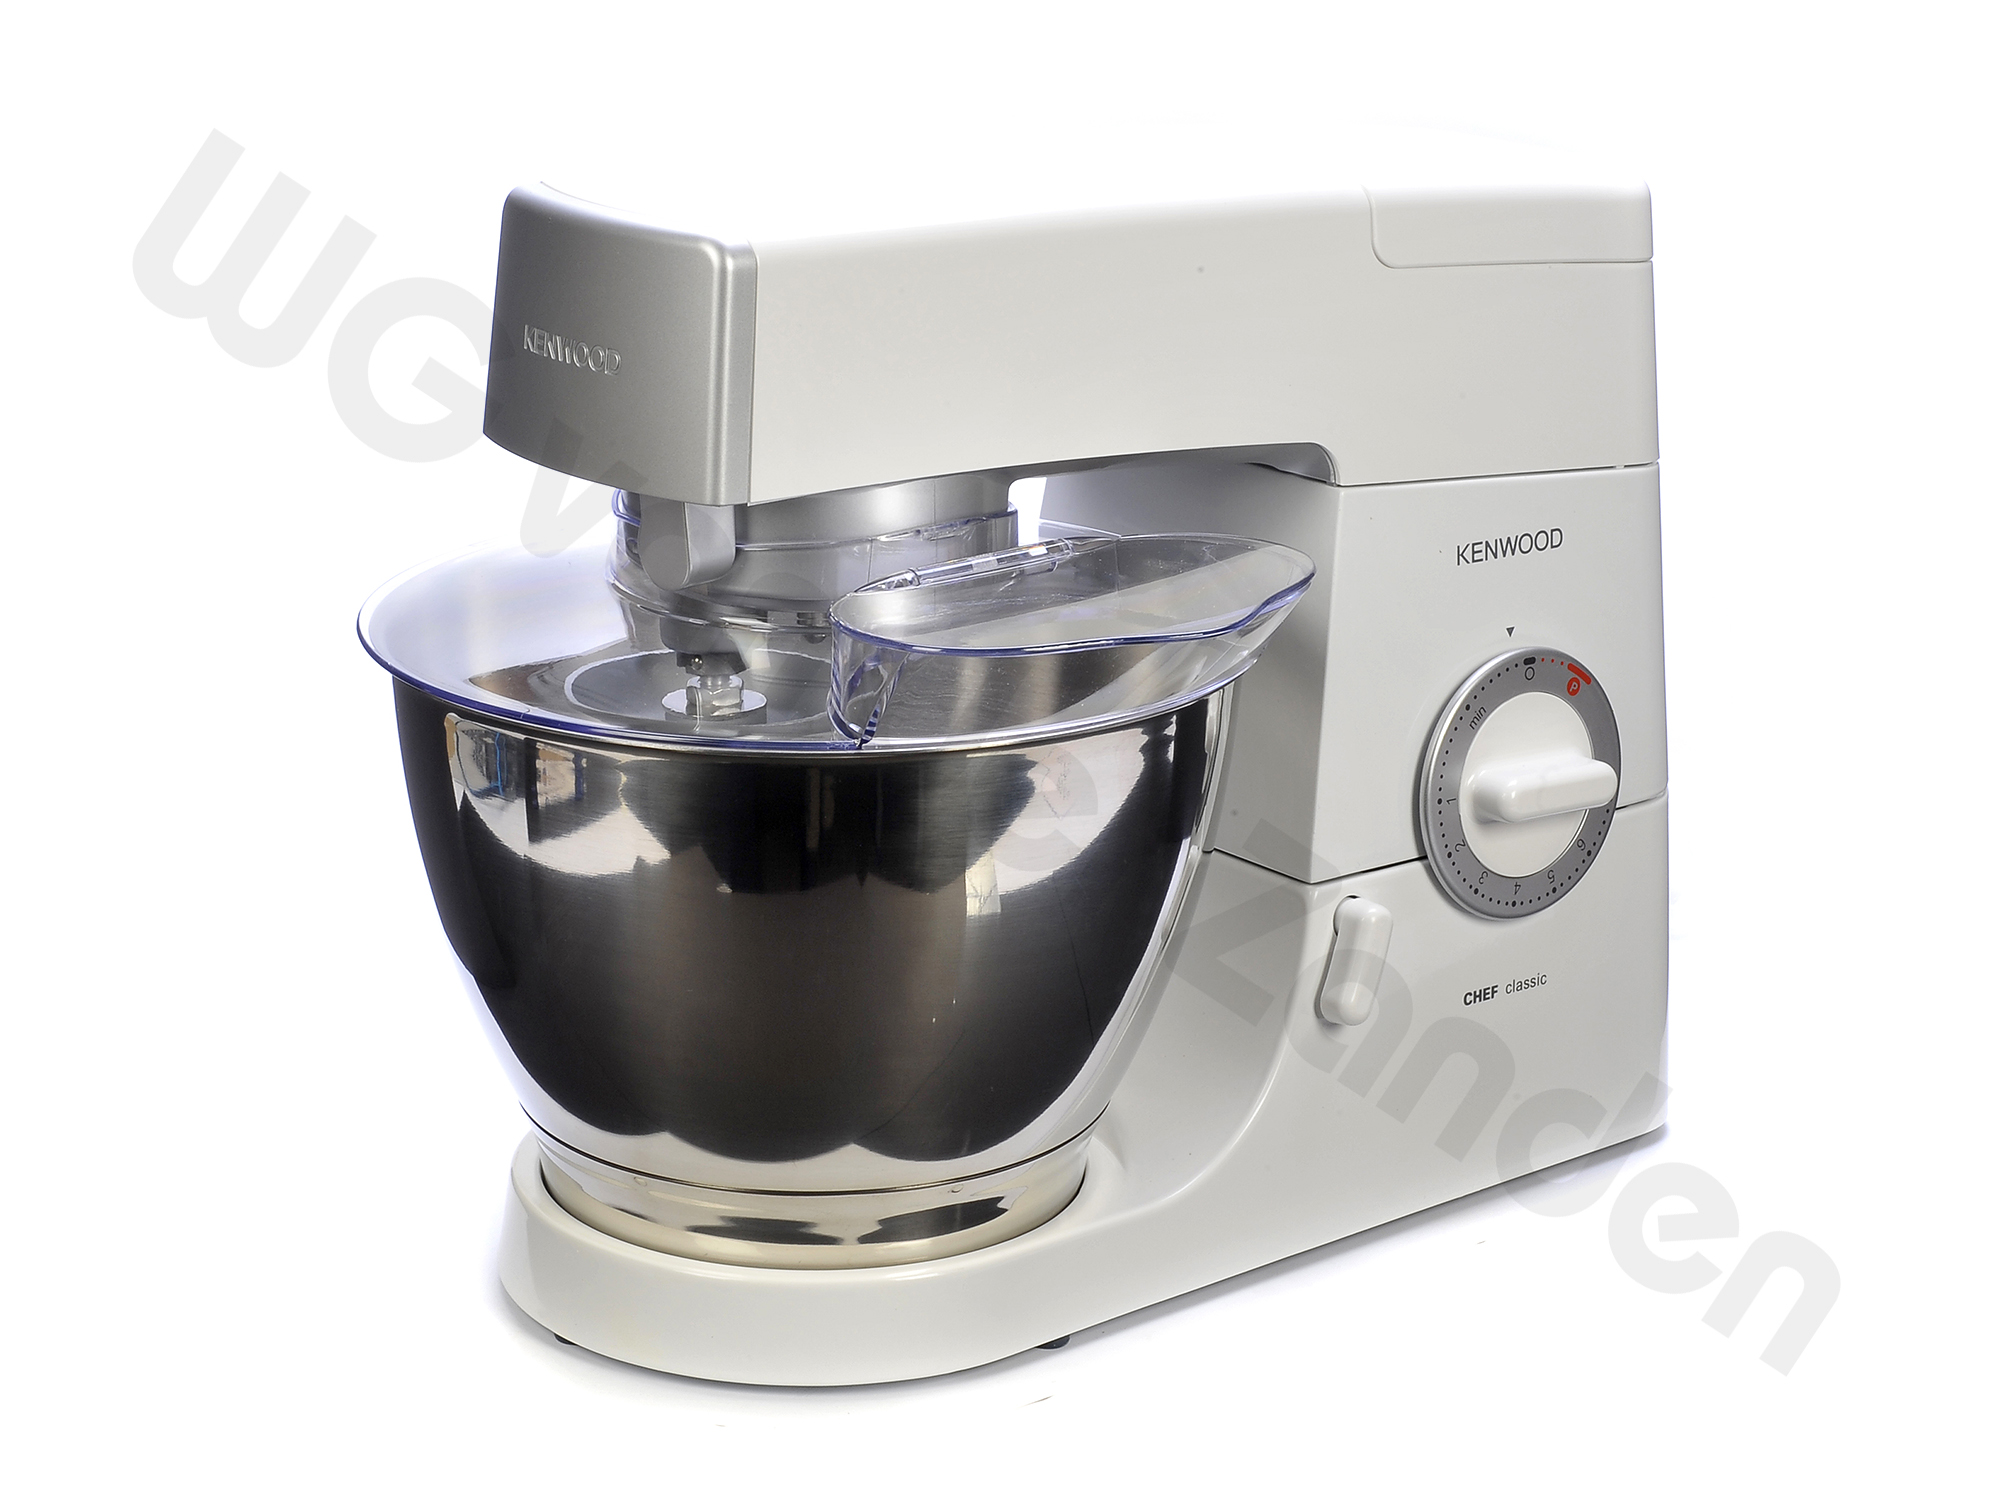 332073 STAND MIXER KENWOOD CHEF 4.6 LTR 230V 1000W 50-60HZ